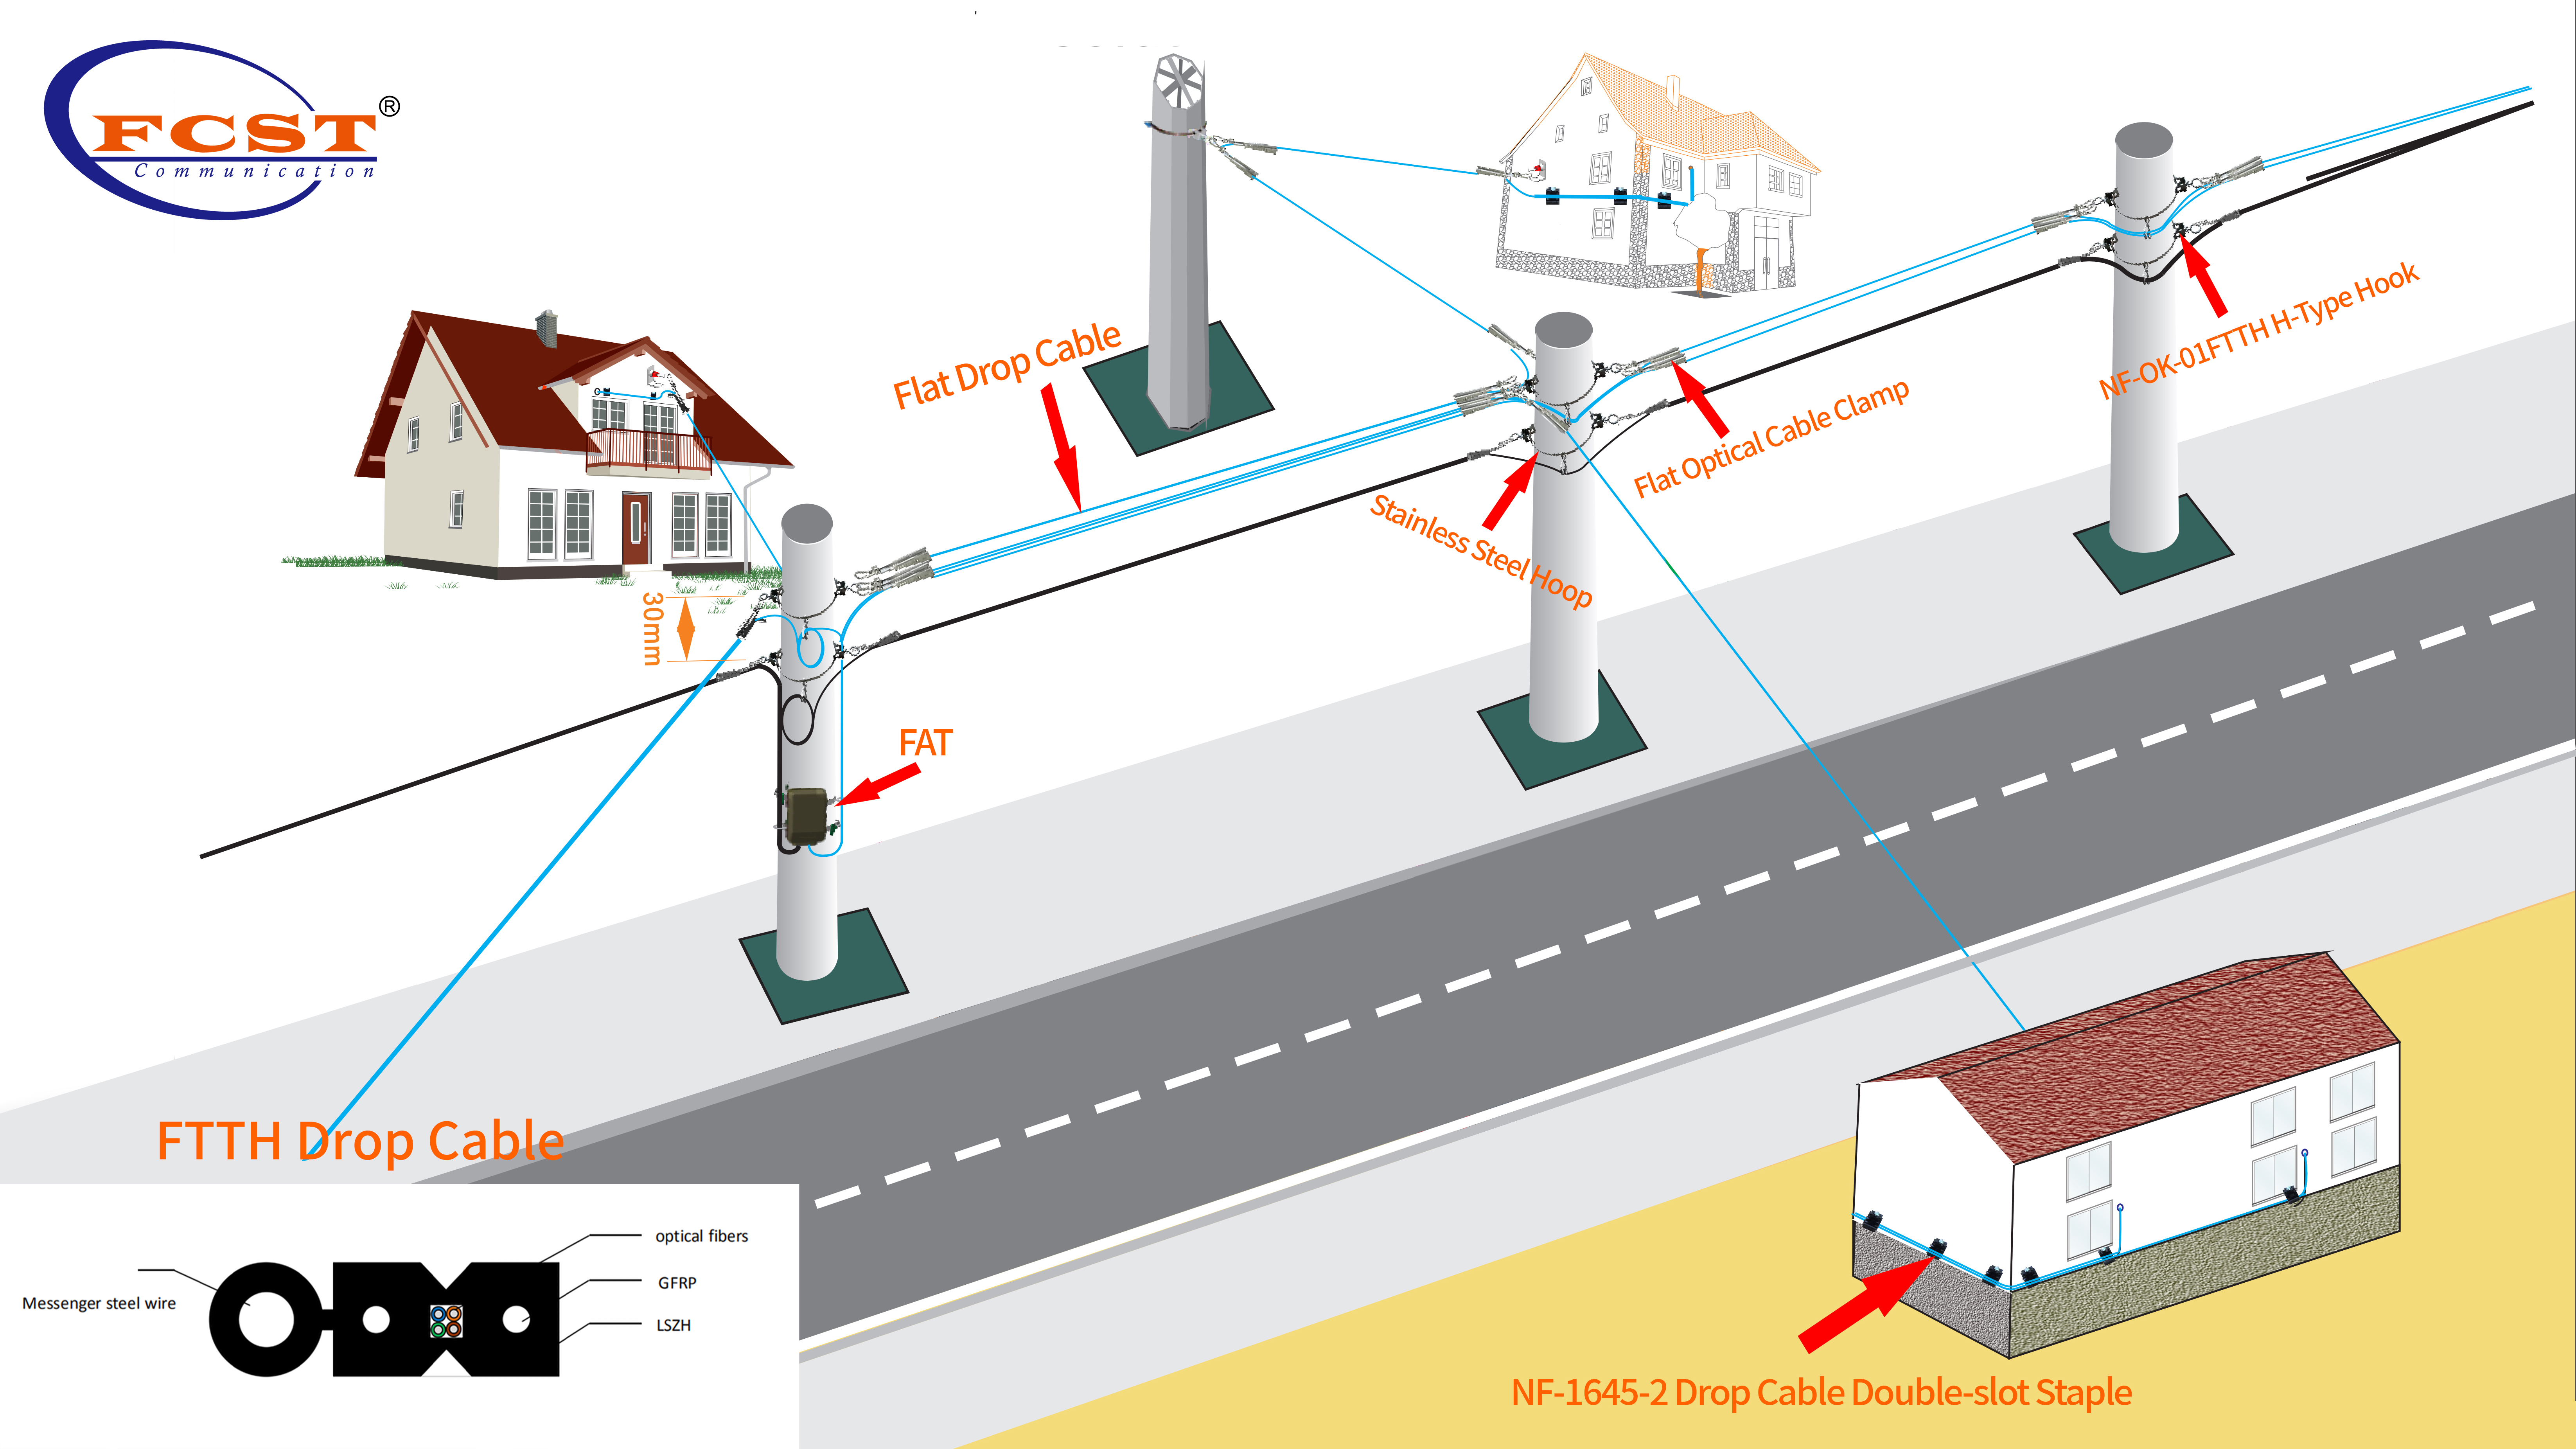 How To Install FTTH Drop Cable In The Air For Last Mile？